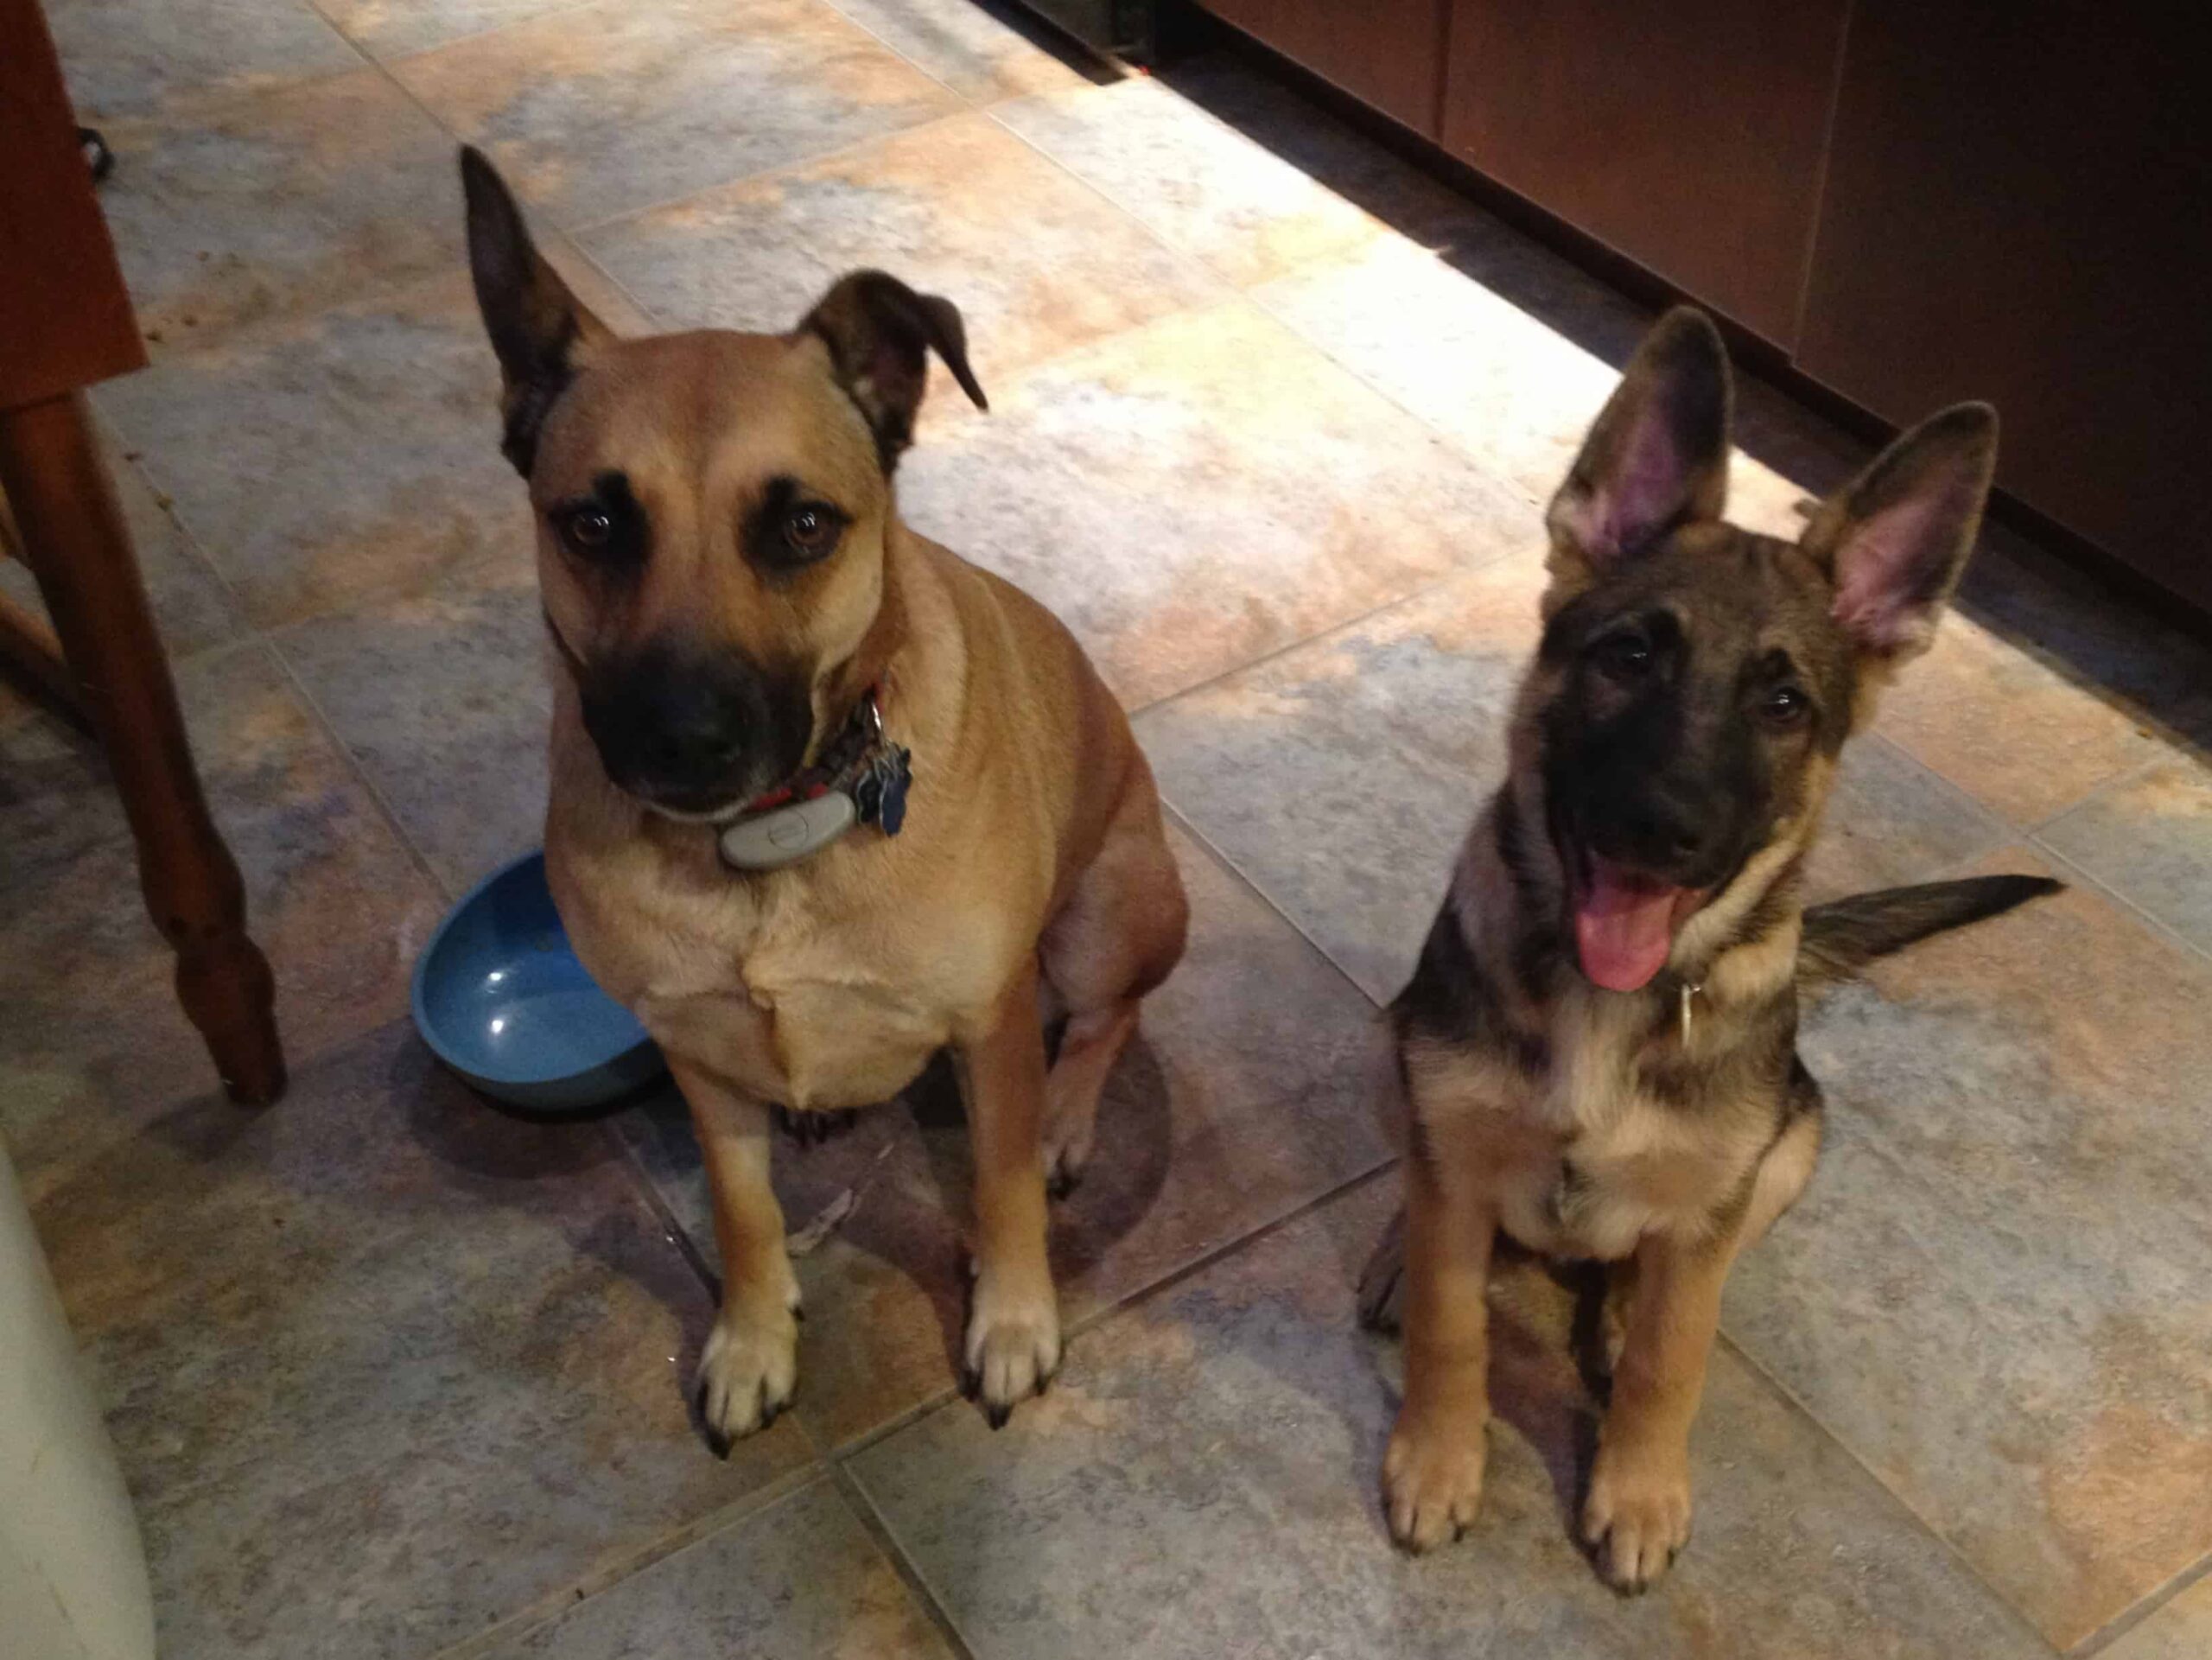 two dogs - a light brown with a dark nose and ears, and a German Shepherd puppy allergies in the home